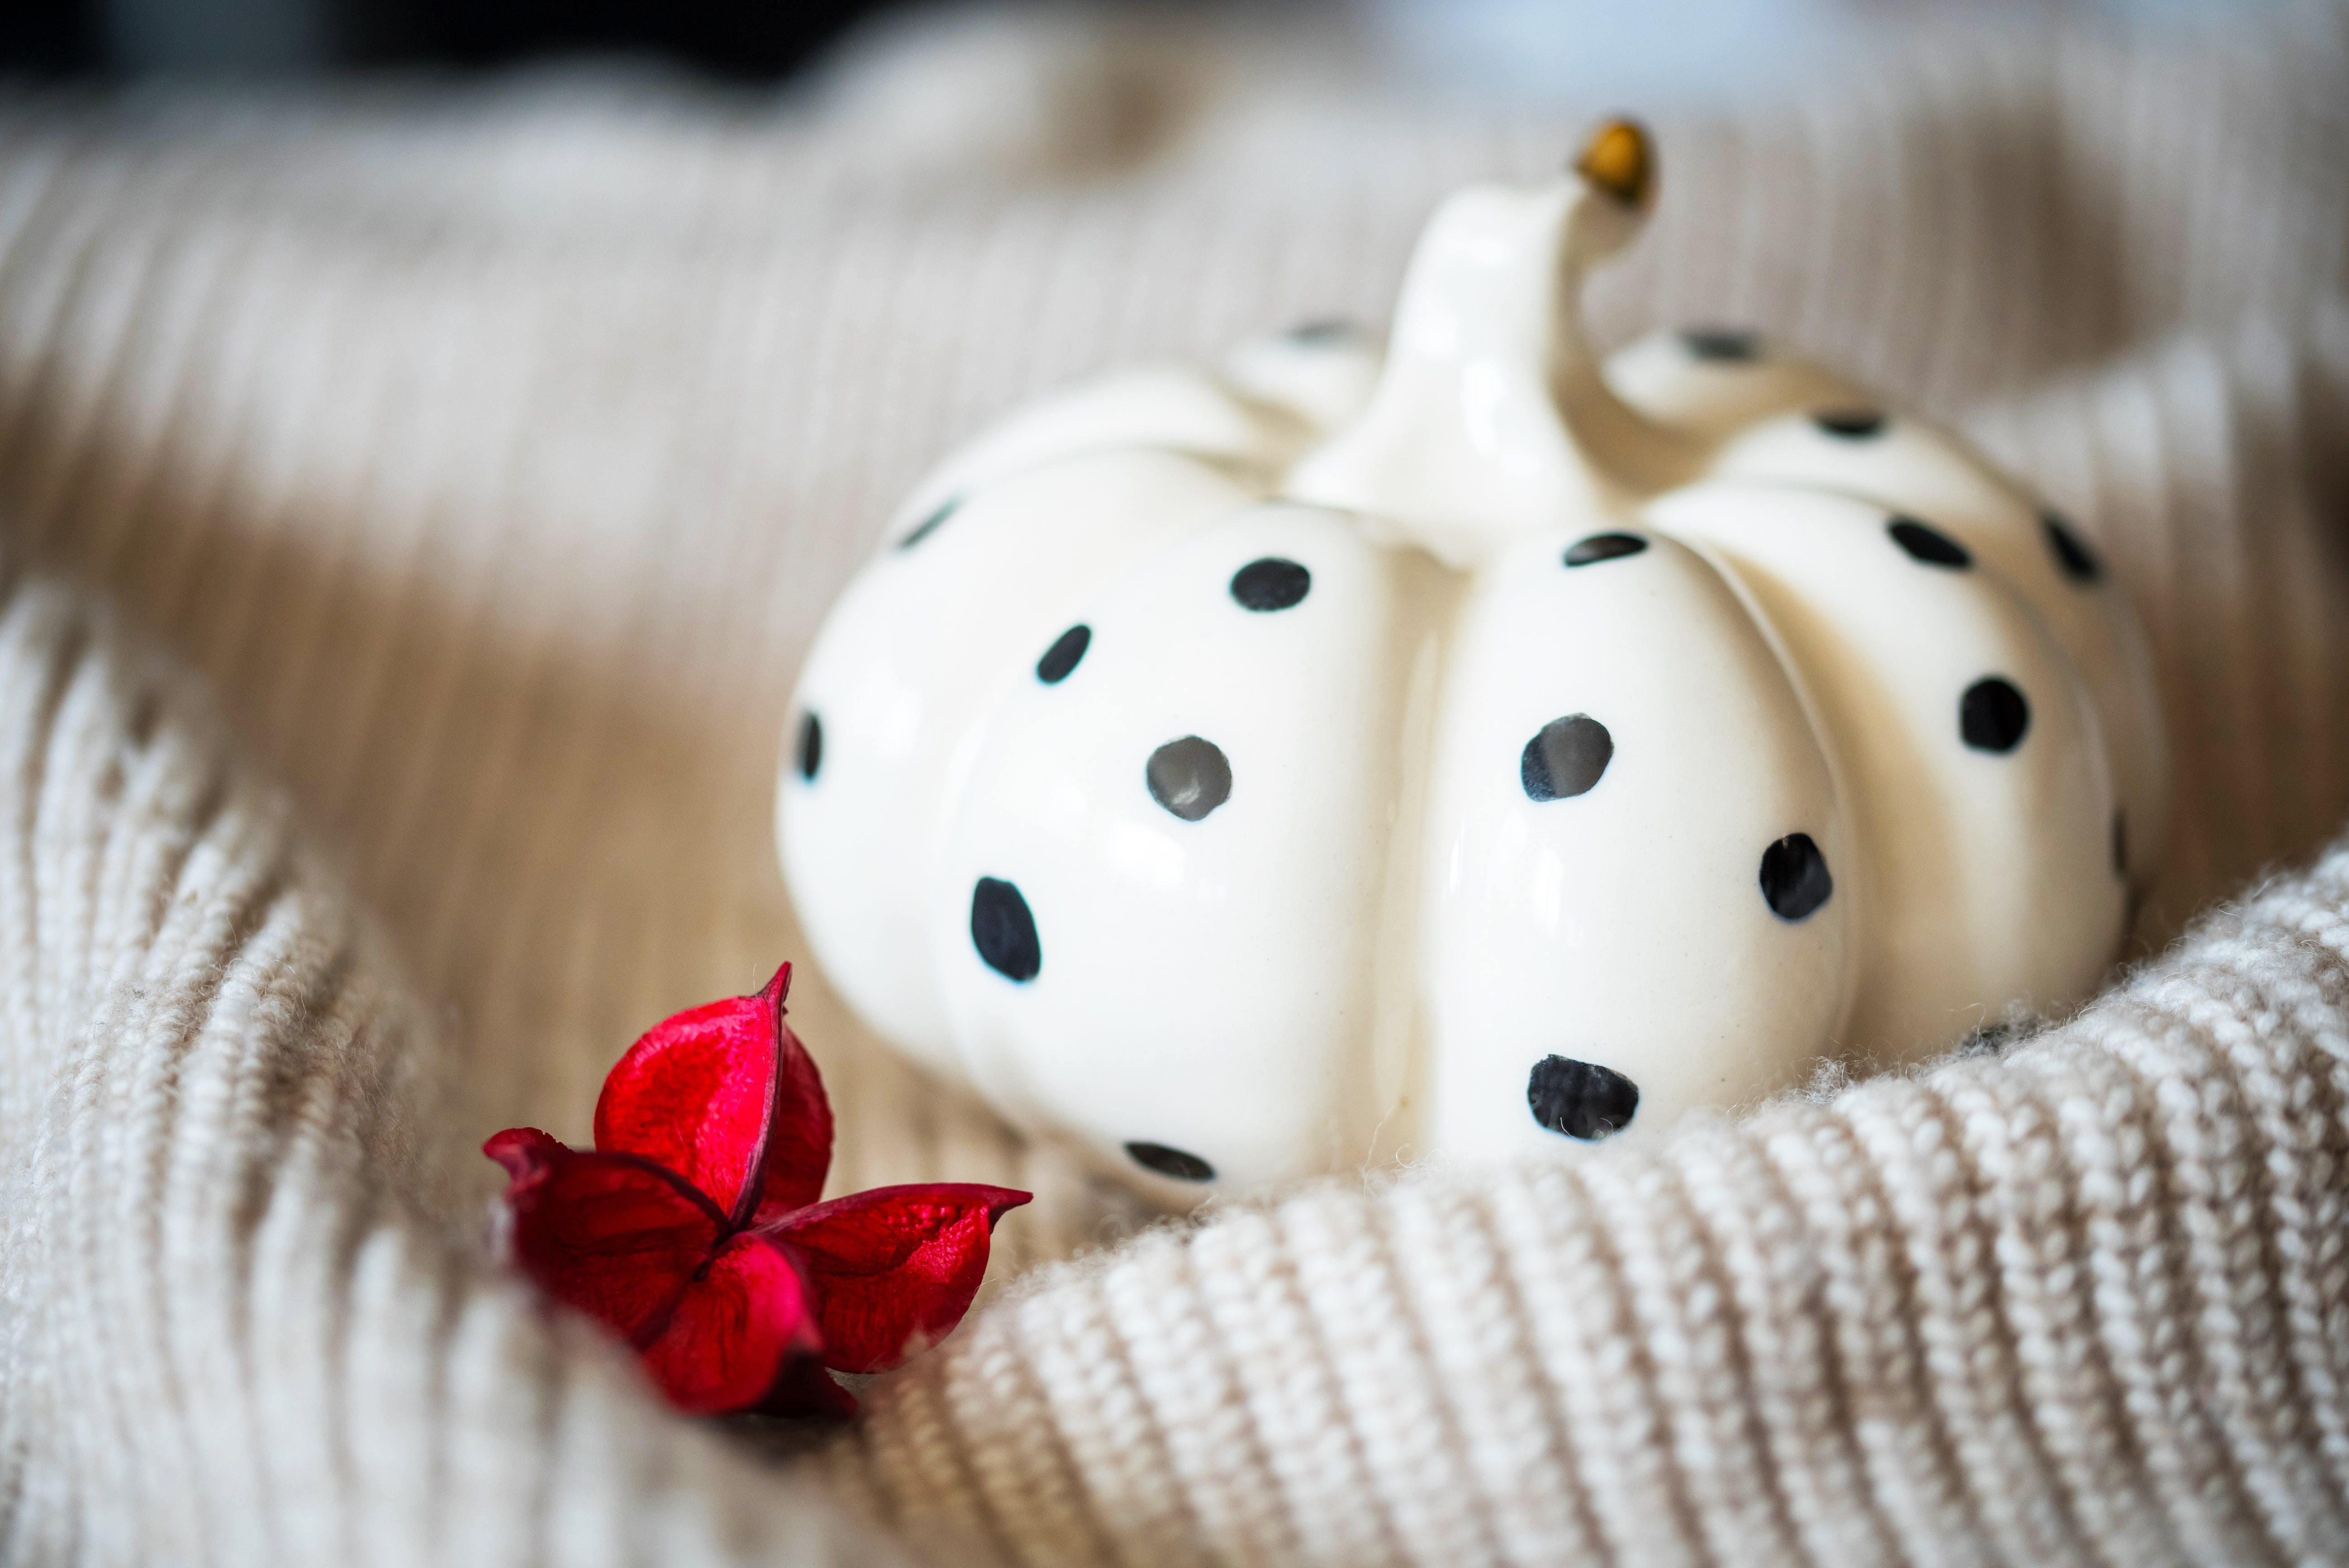 BLACK DOTTED WHITE PORCELAIN PUMPKIN STATUE WITH GOLD - ZLATNAporcelain